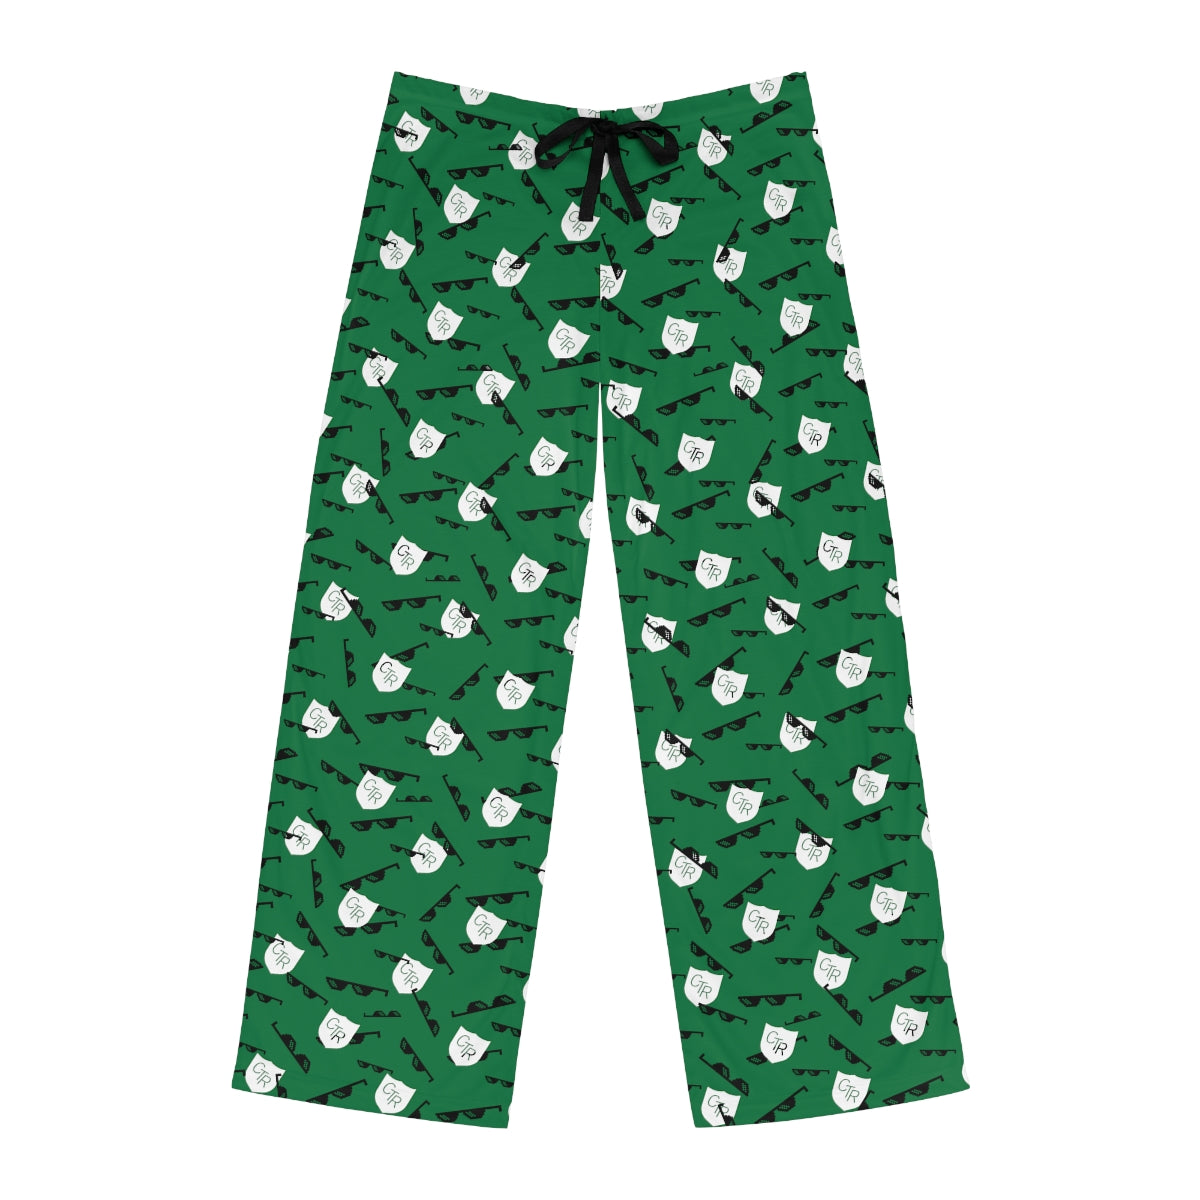 Choose the Right and Deal With It Pajama Pants